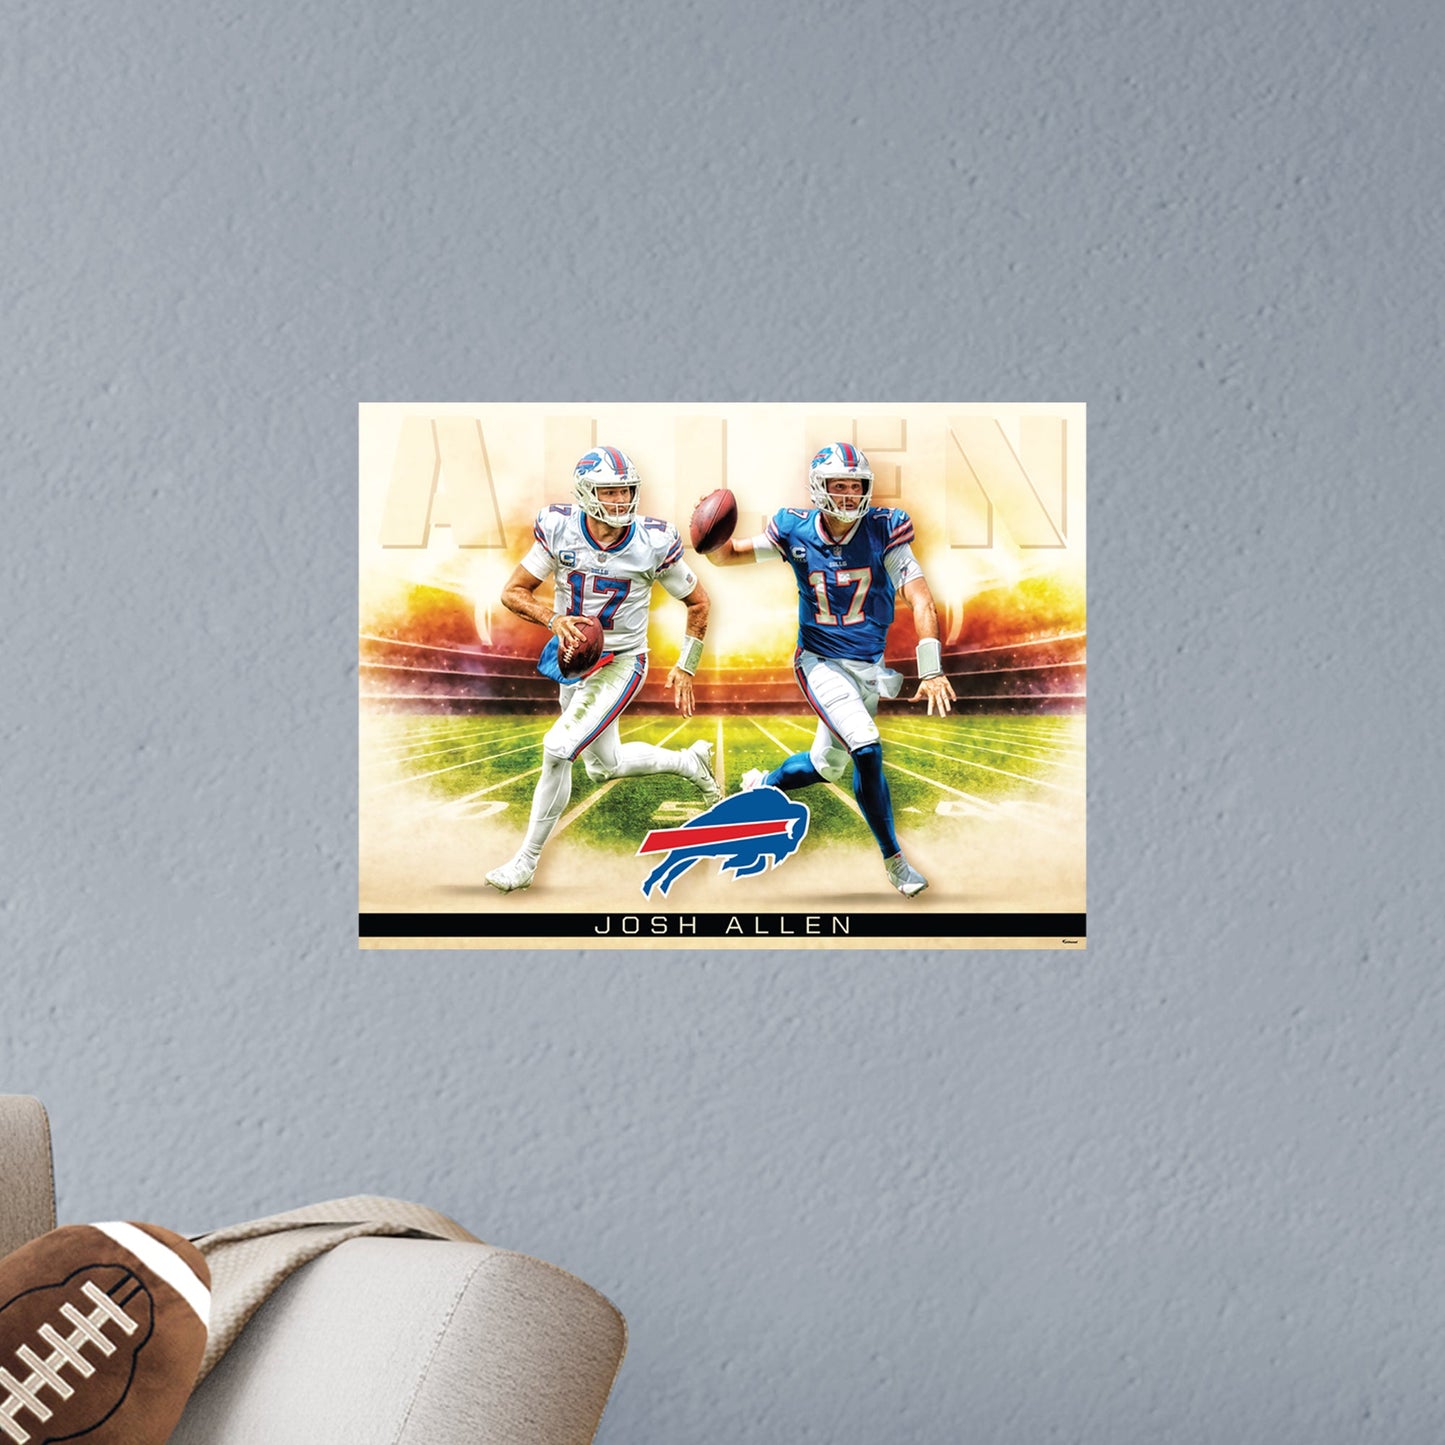 Buffalo Bills: Josh Allen Icon Poster - Officially Licensed NFL Removable Adhesive Decal